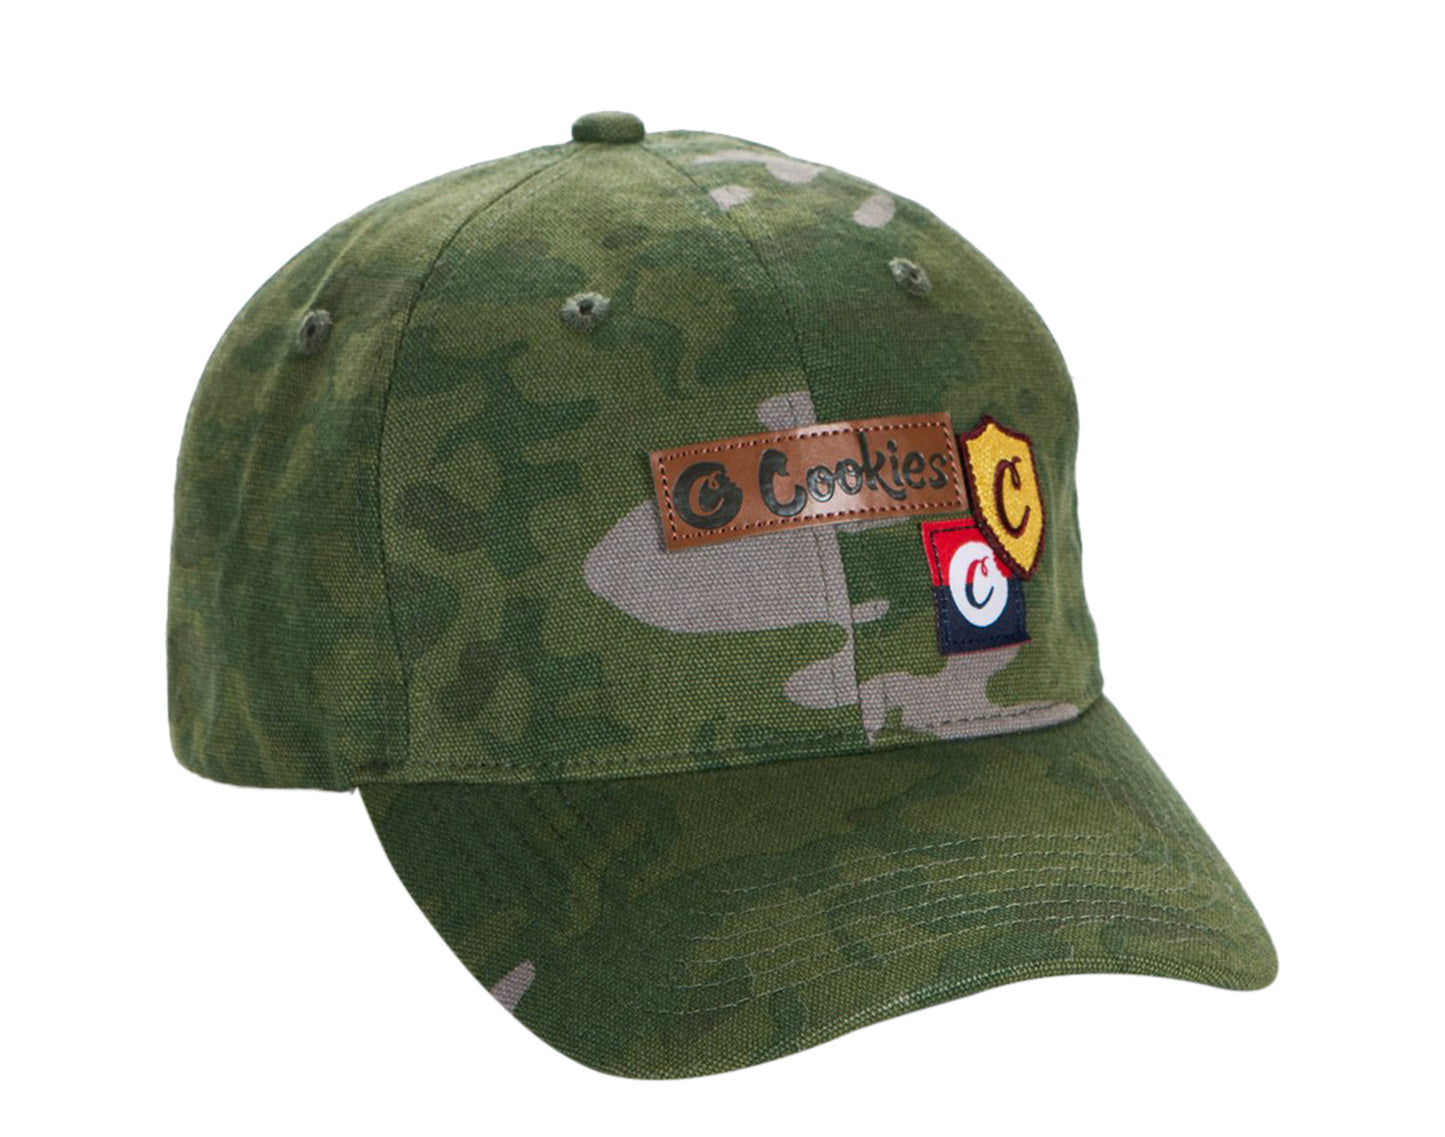 Cookies Backcountry Cotton Canvas Patchwork Olive Camo Dad Hat 1546X4315-OLC